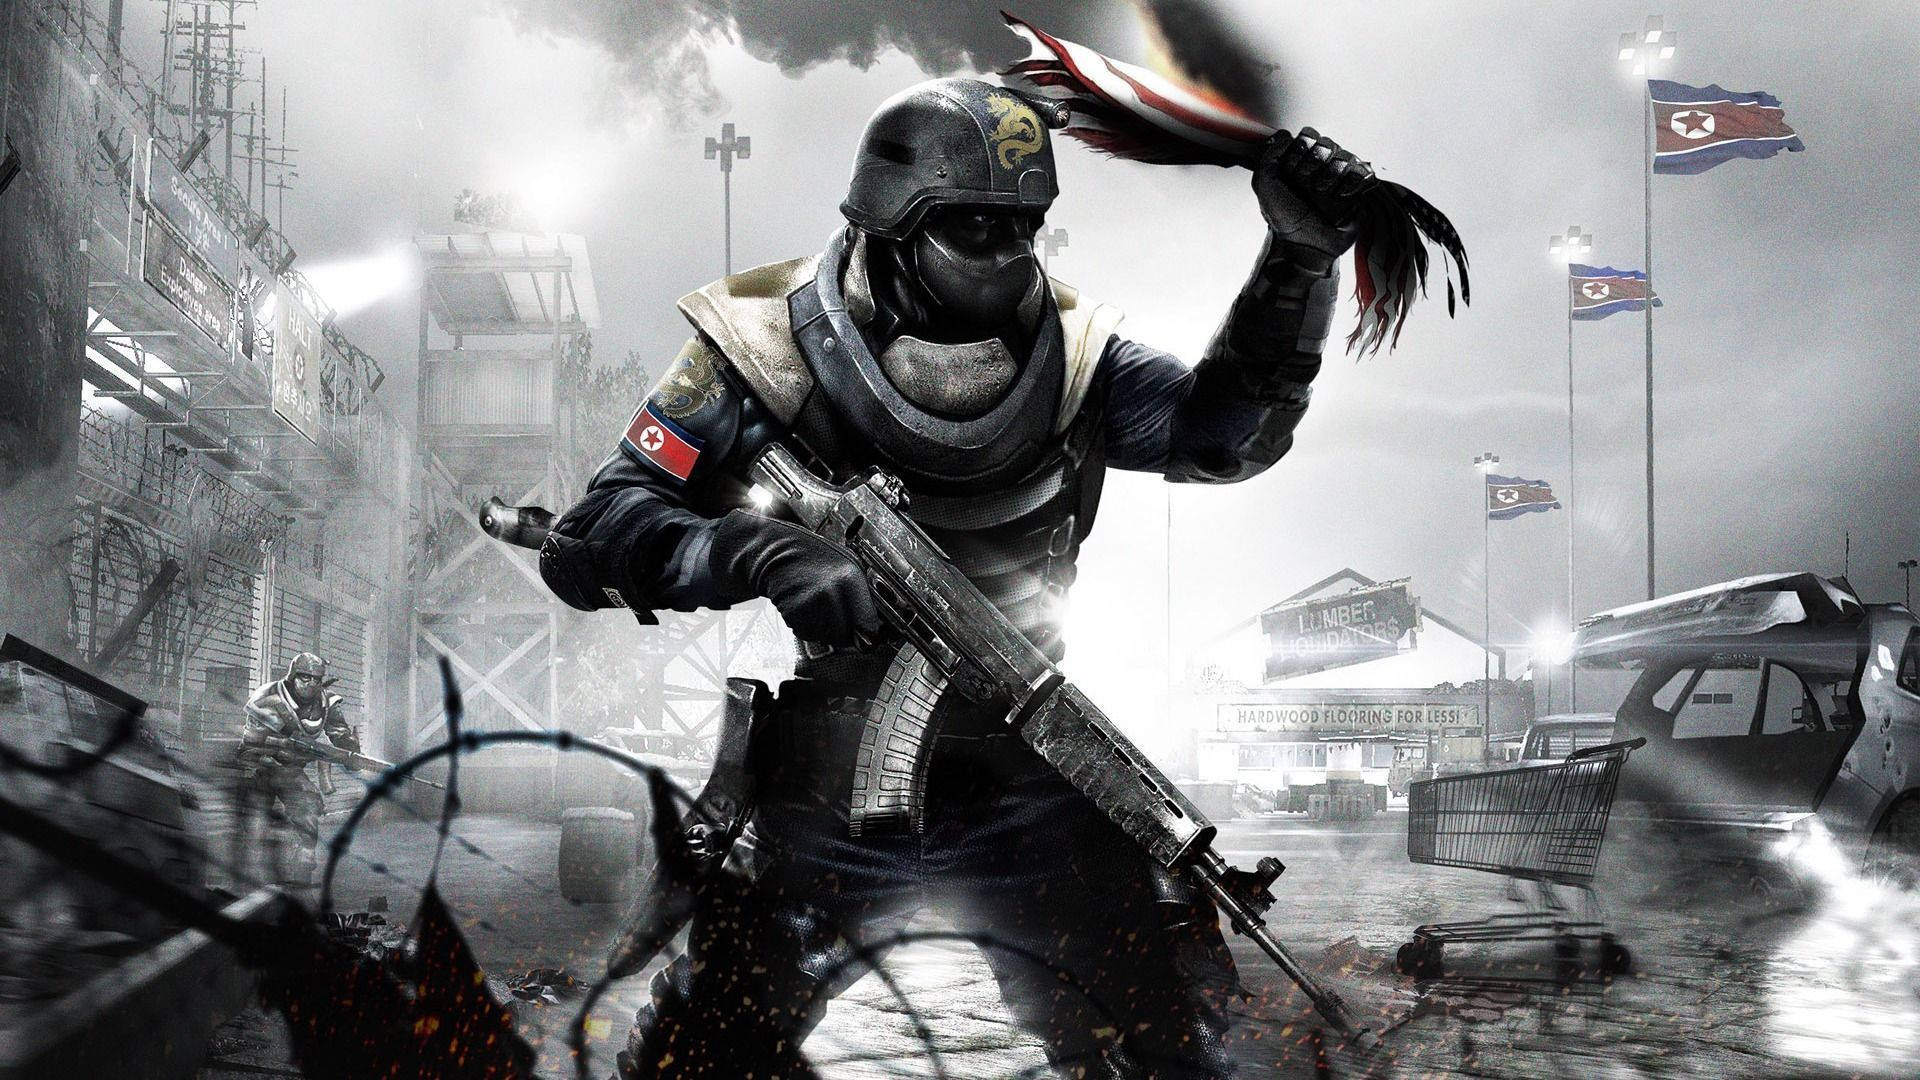 Cool Gaming Homefront Poster